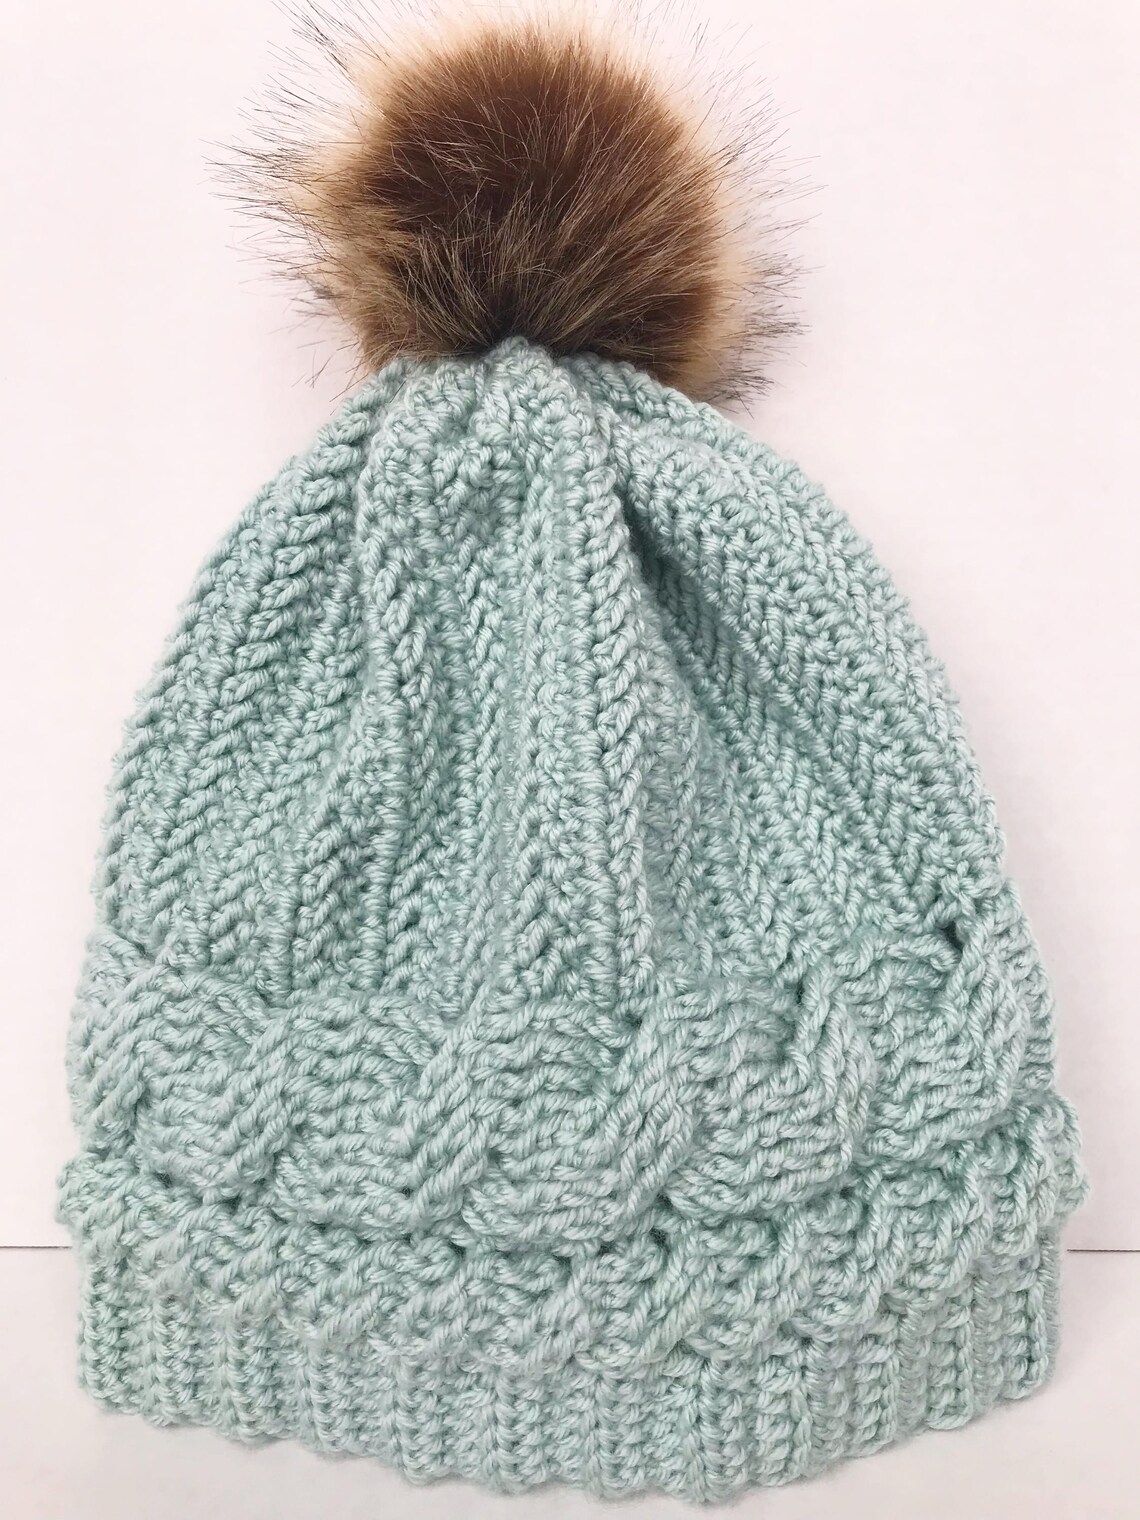 Charlotte Cable Crochet Hat (Download Now) - Etsy